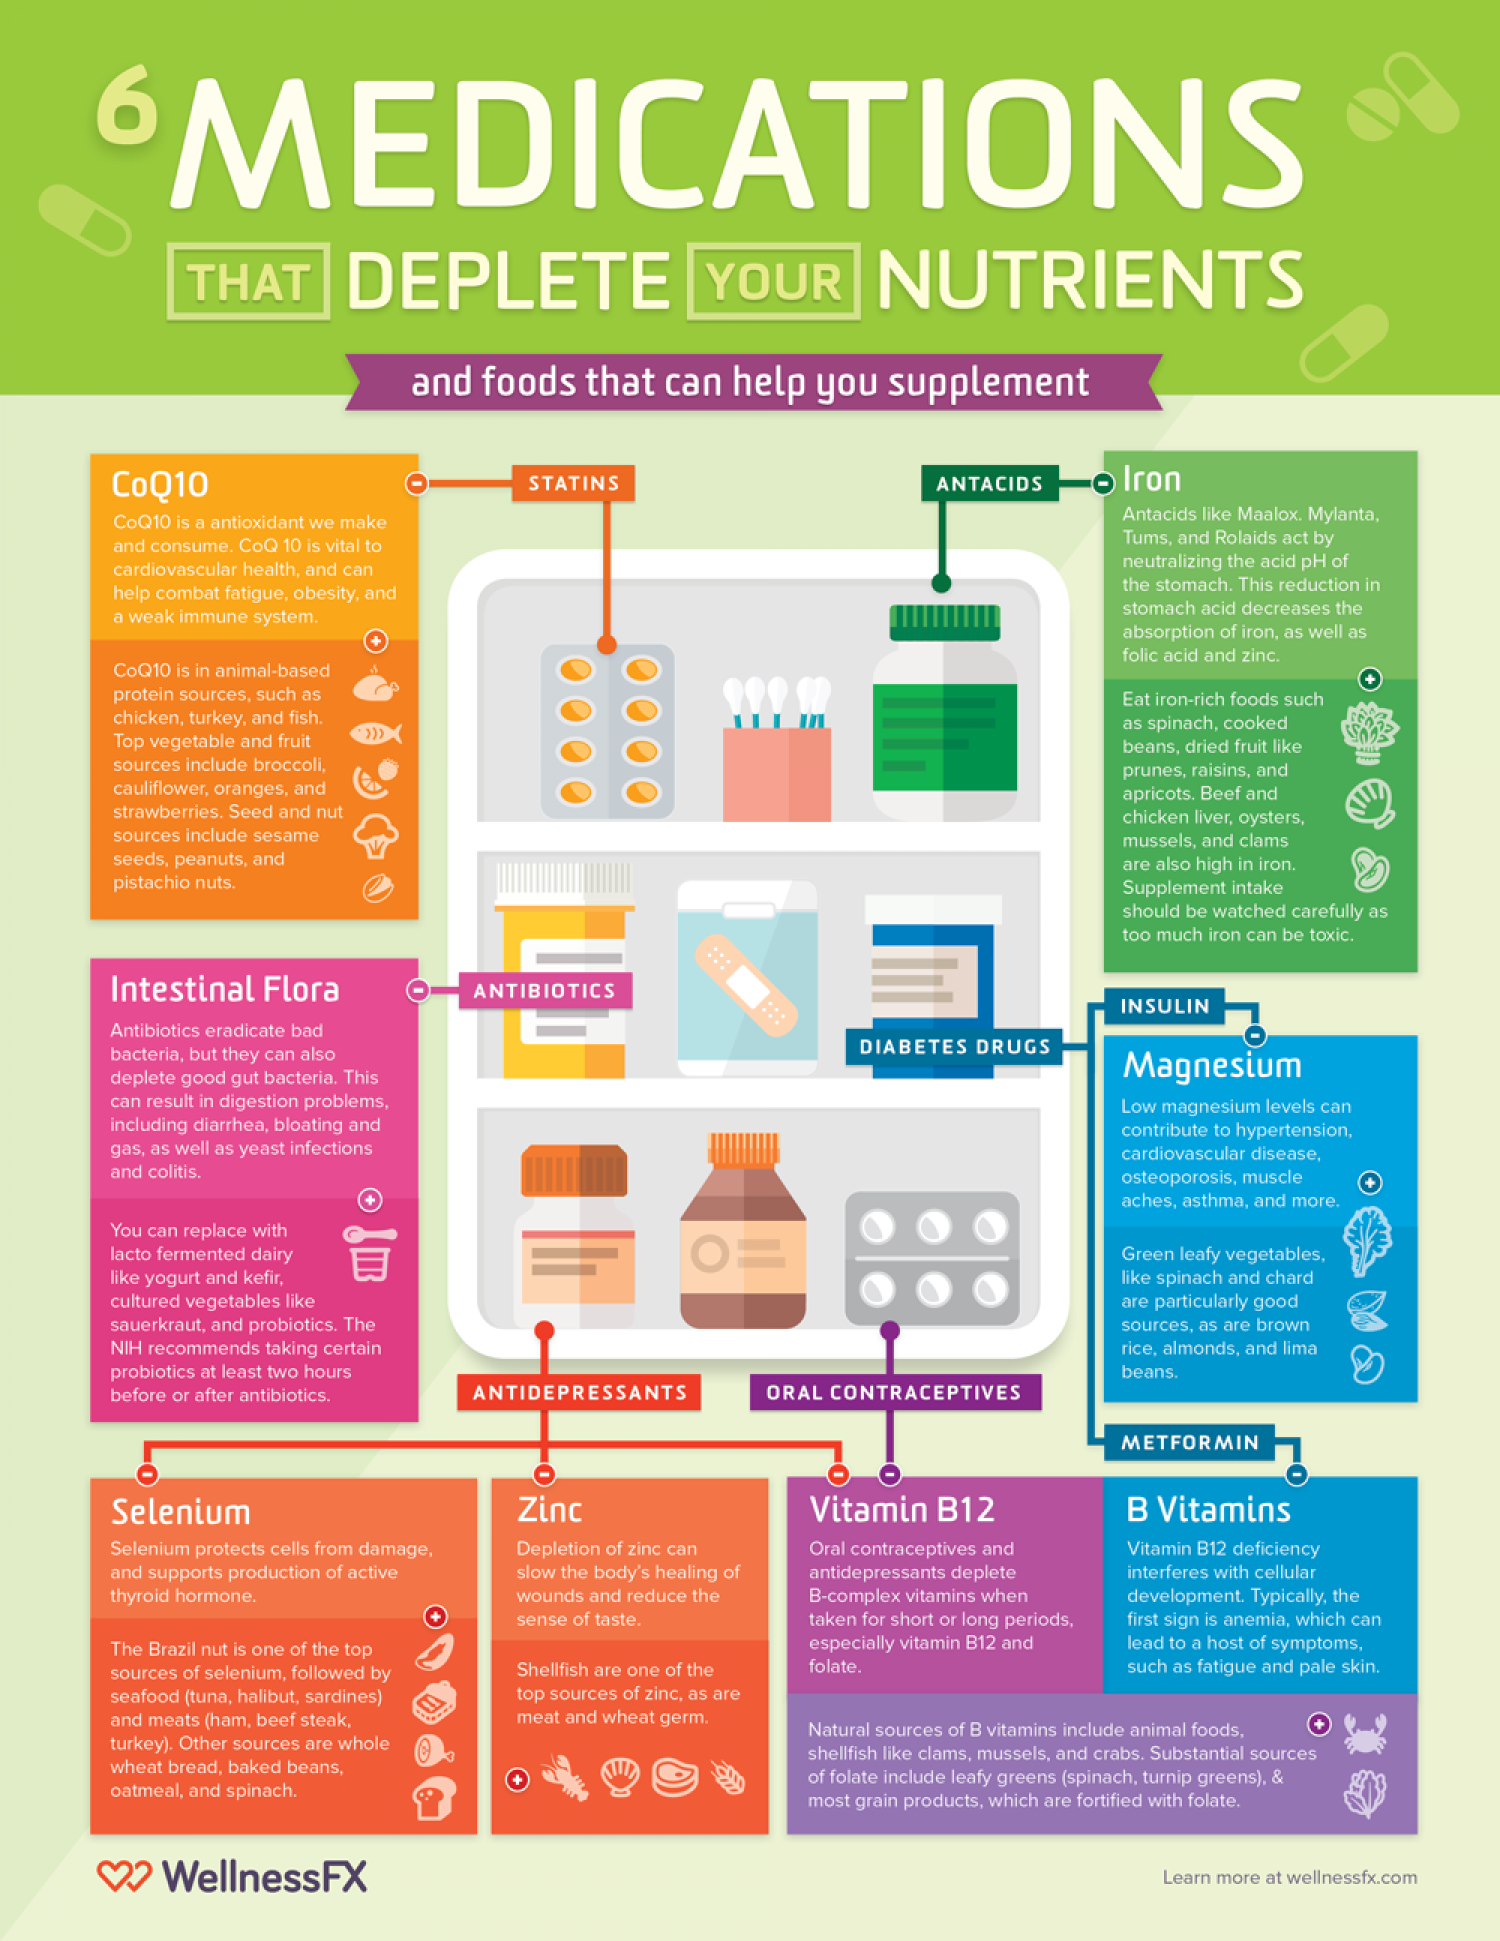 6 Medications that Deplete Your Nutrients (and how you can supplement) Infographic